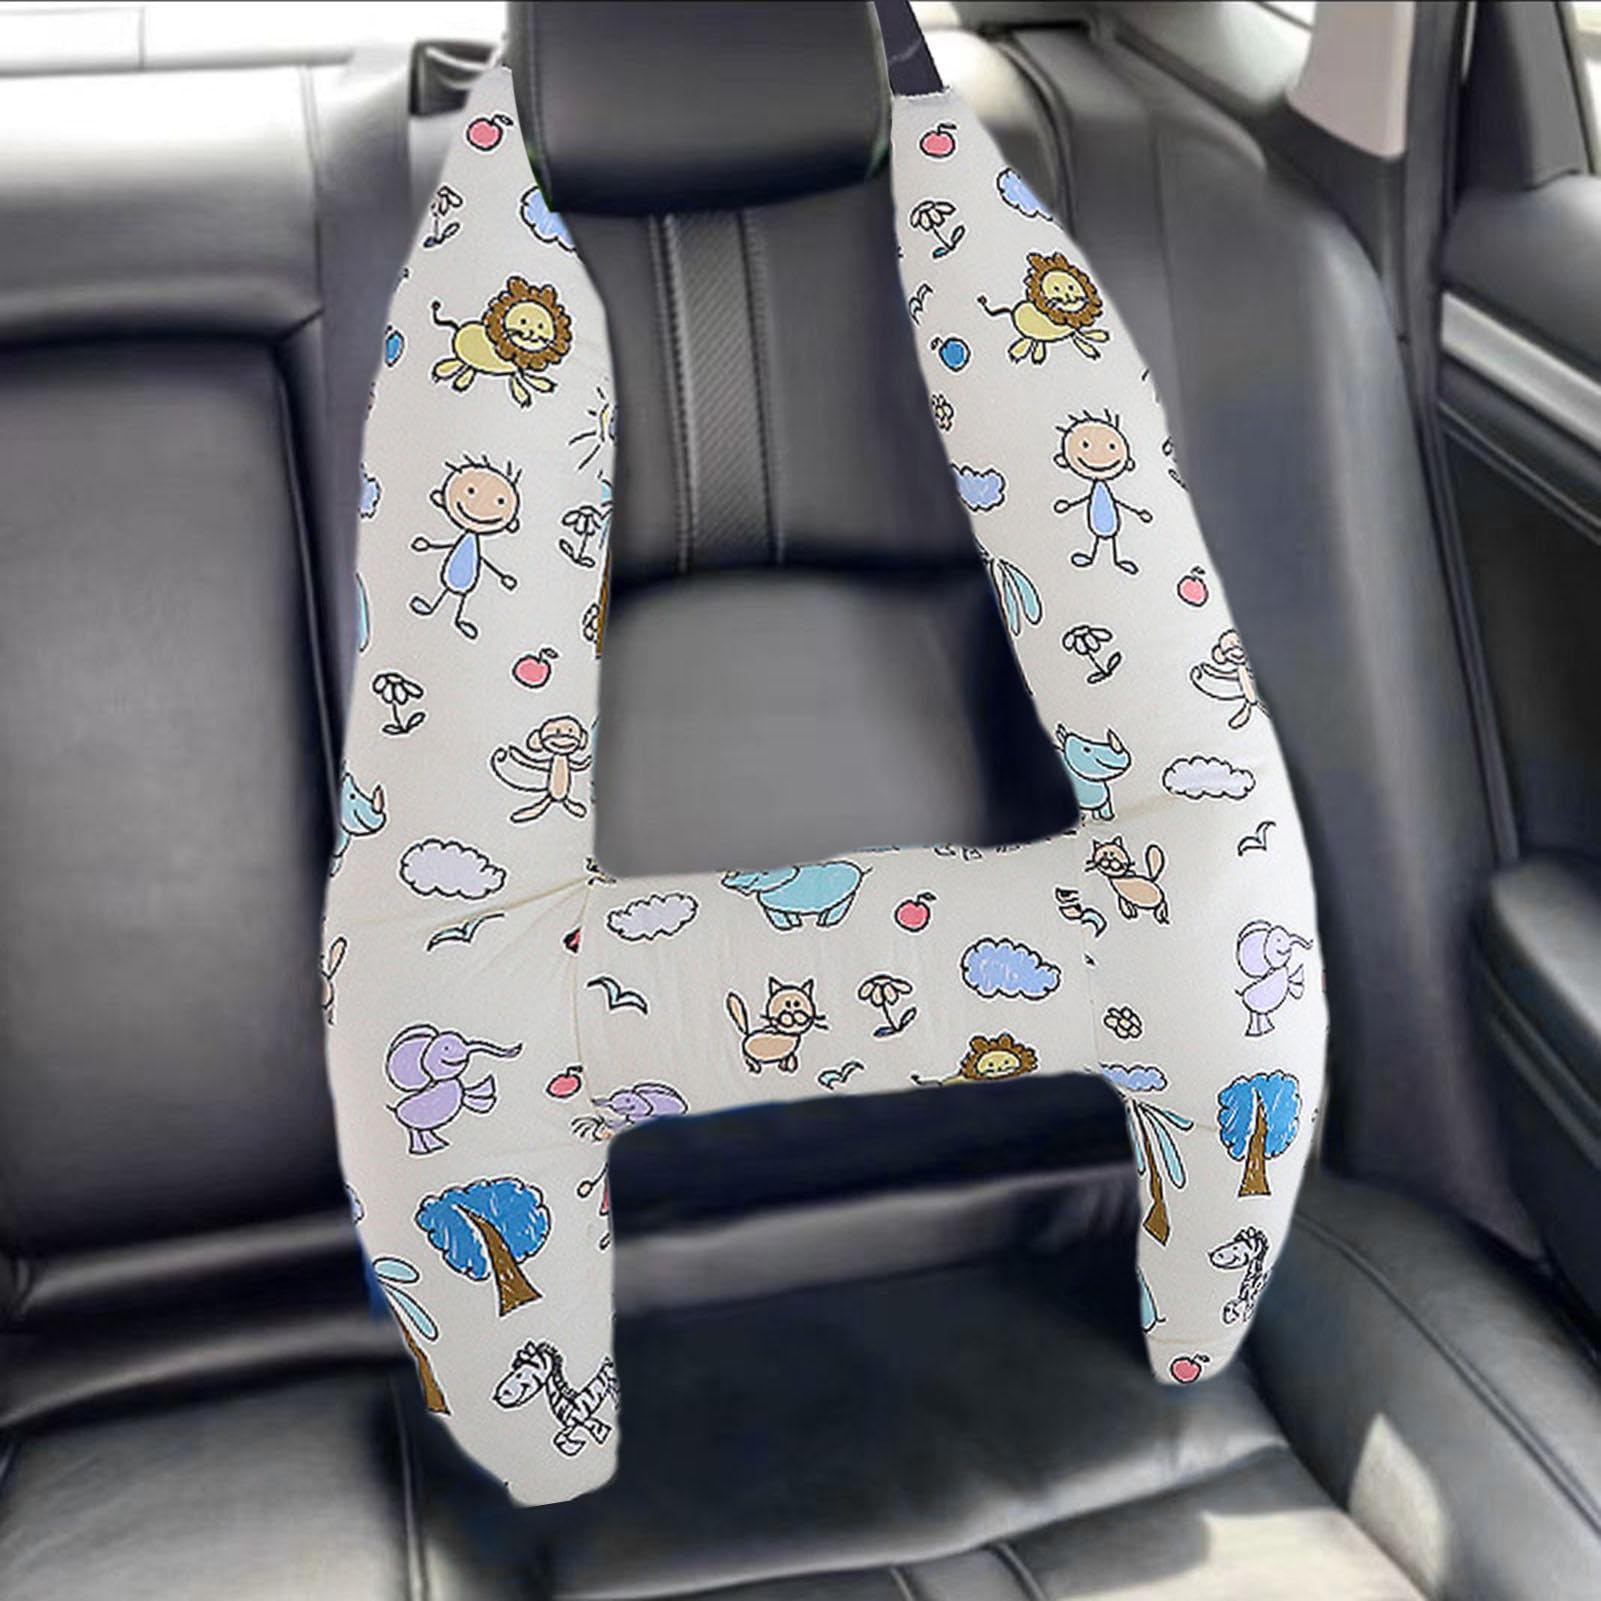 H-Shape - Kid Car Sleeping Head Support, Baby Toddler Travel Pillows for Car Seat Support The Body and Head, Kid Car Sleeping Head Support, Kid's Pillow, Baby Neck Pillow, Soft and Skin Friendly